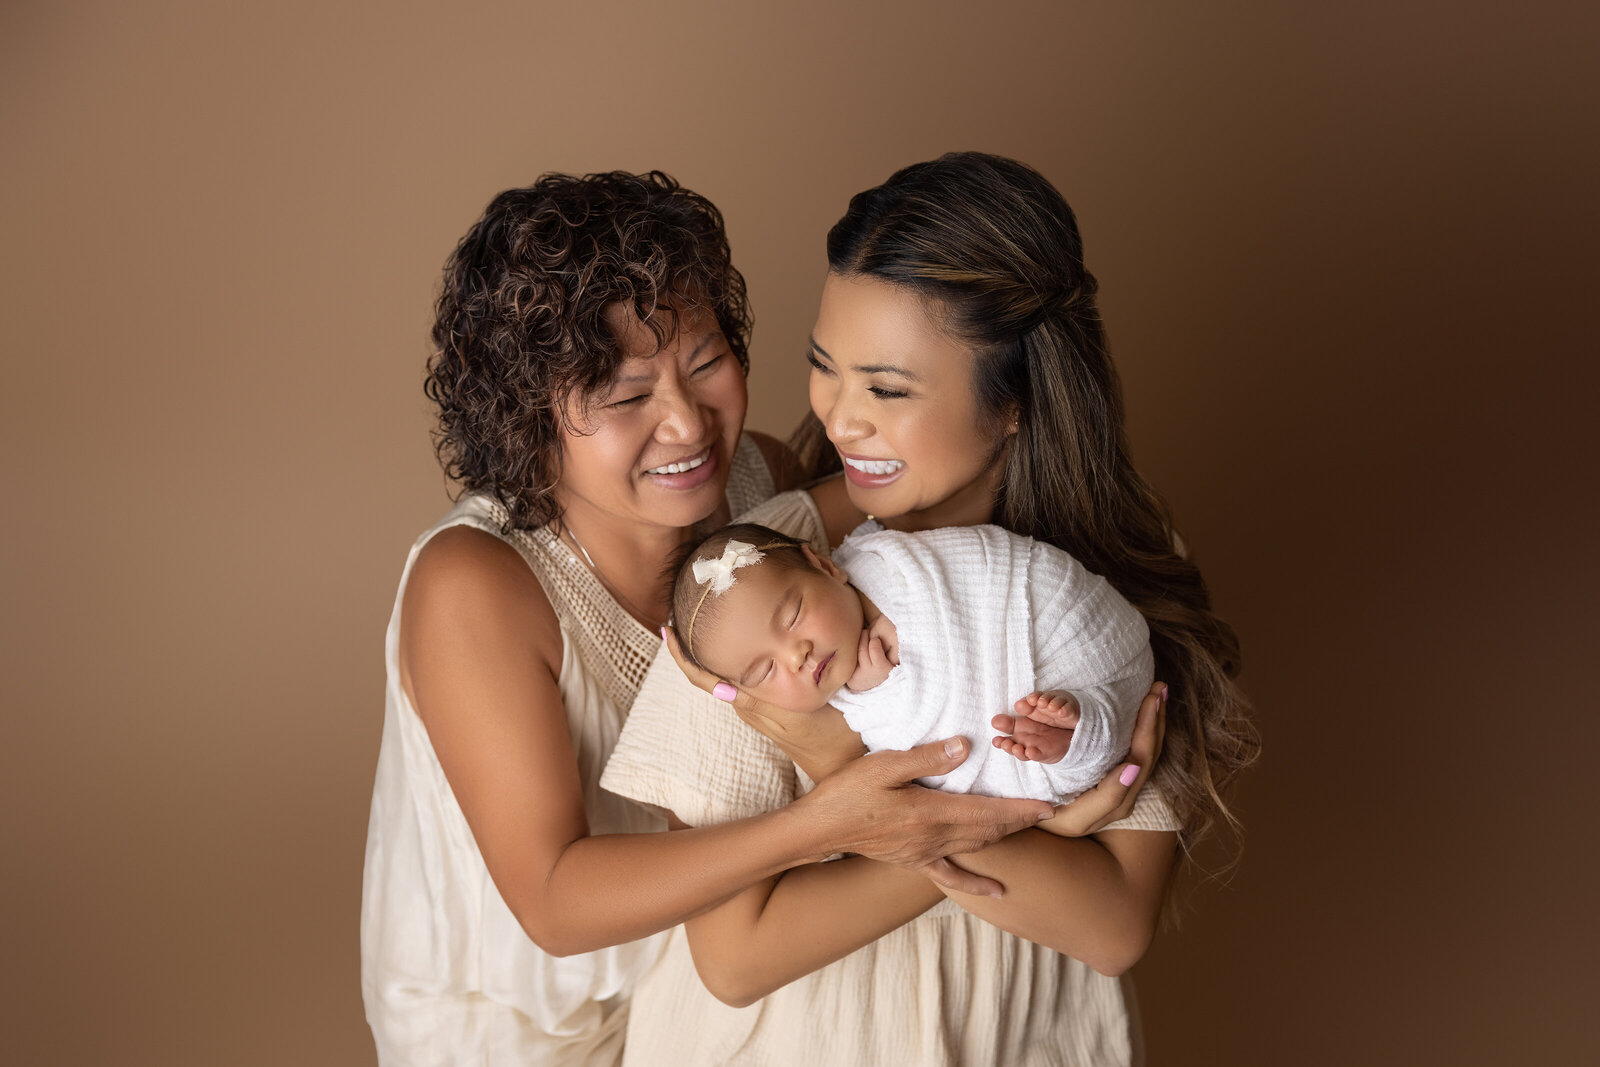 Newborn photoshoot by top London, Ontario baby photographer Amy Perrin-Ogg. Mom is holding baby in her arms with baby facing the camera. Mom is looking over her shoulder and smiling at the baby's grandma. The Grandma is smiling at the baby girl. Three generations photo.